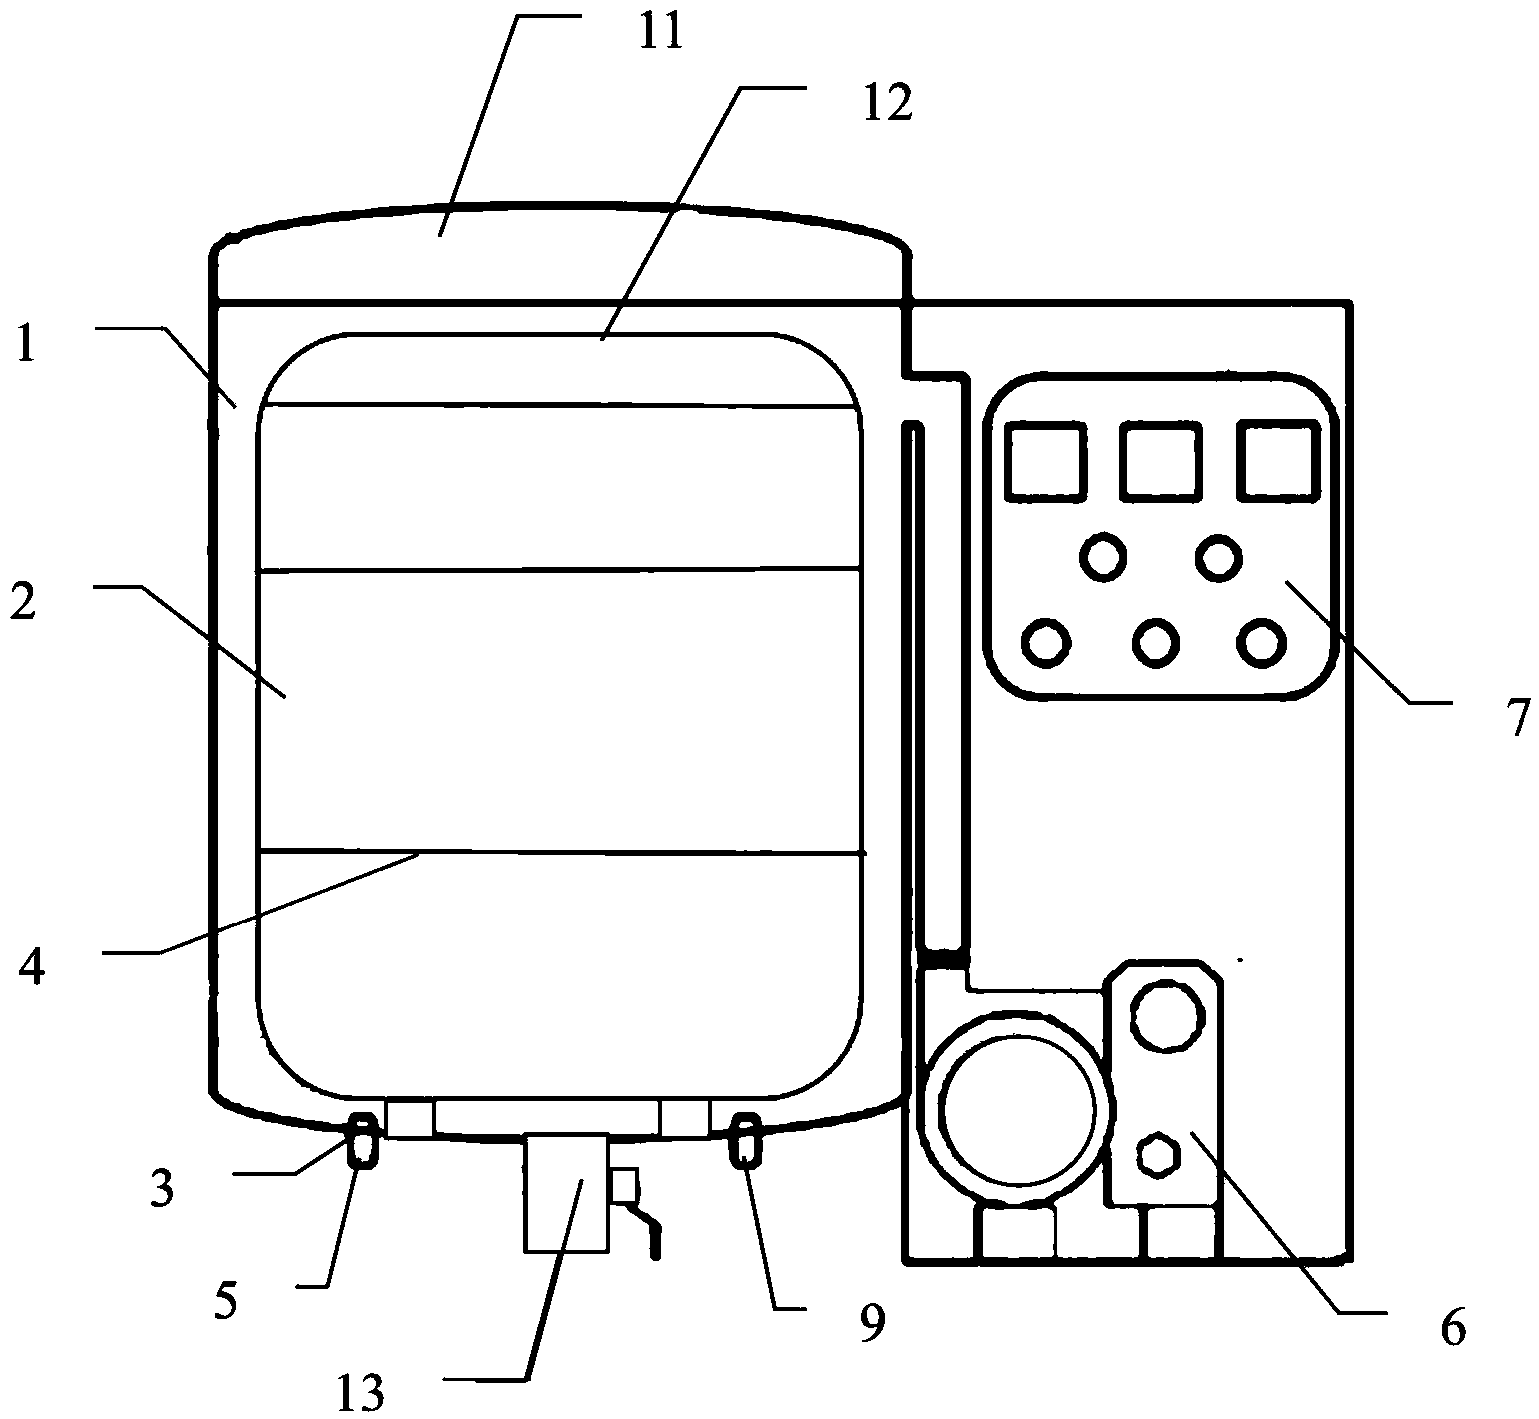 Transformation static curing equipment for foods and curing method thereof